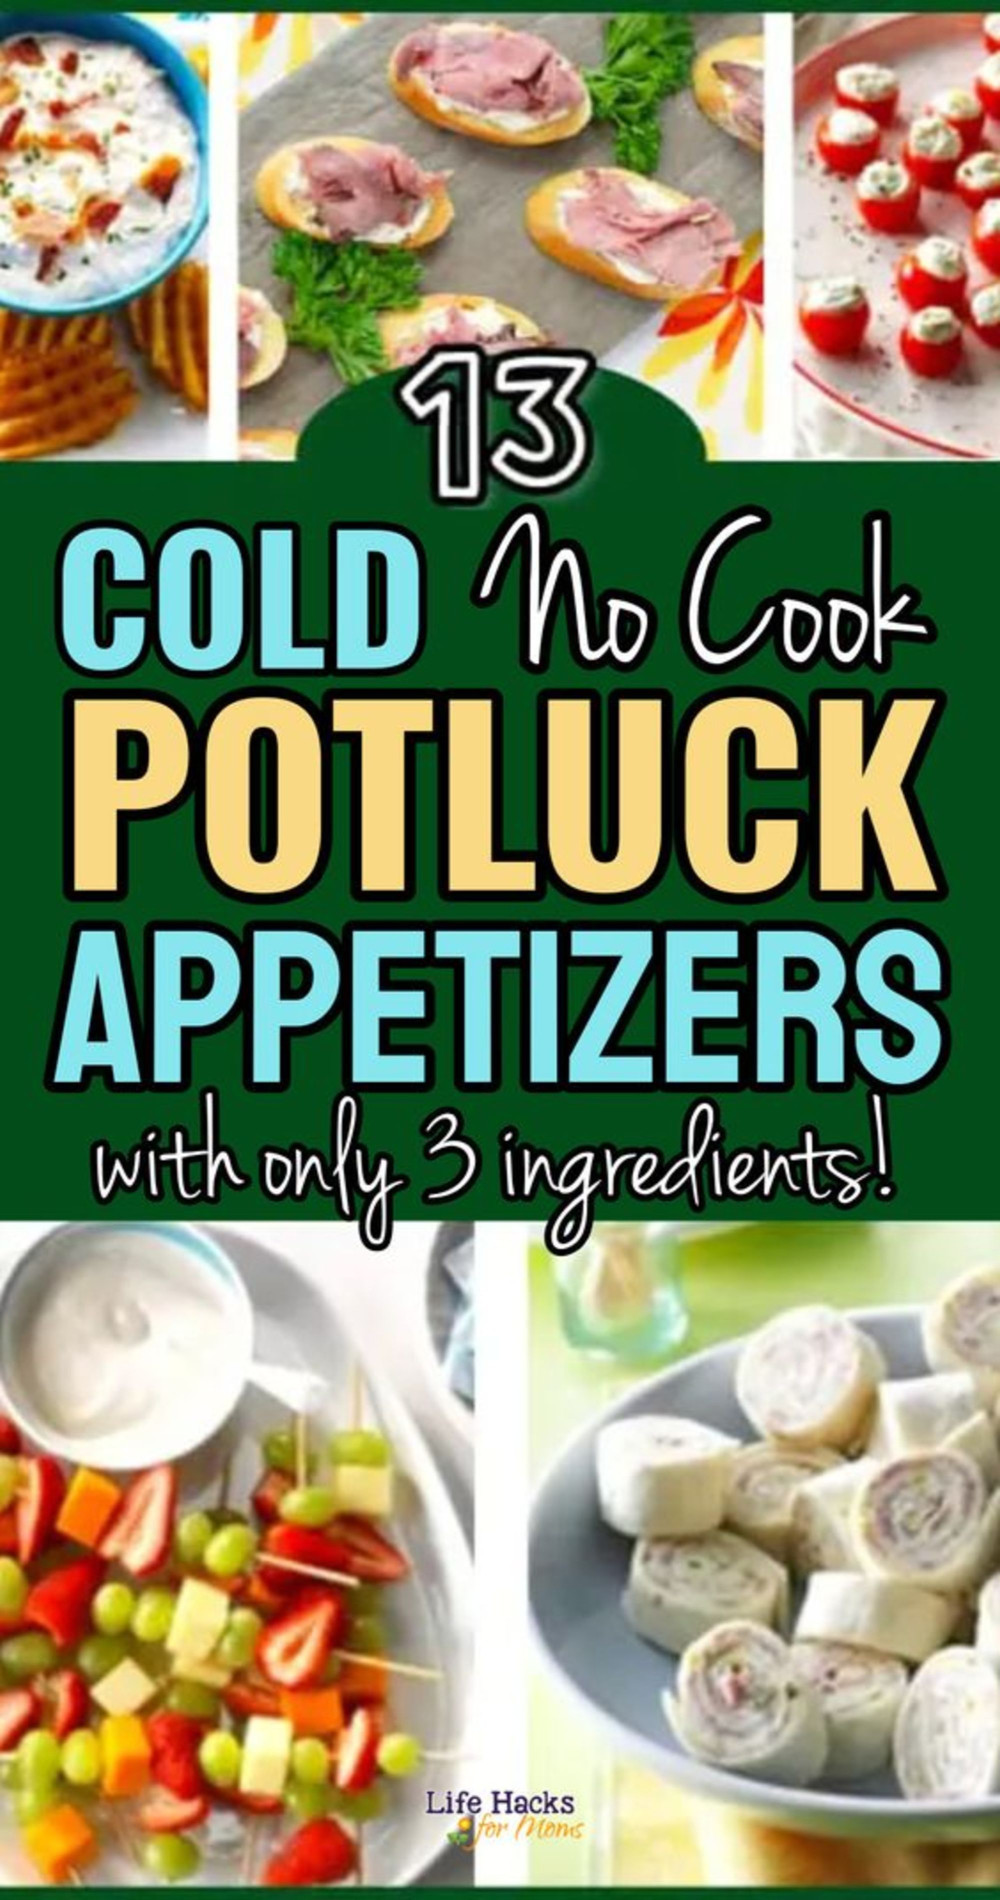 13 cold potluck appetizers with only 3 ingredients